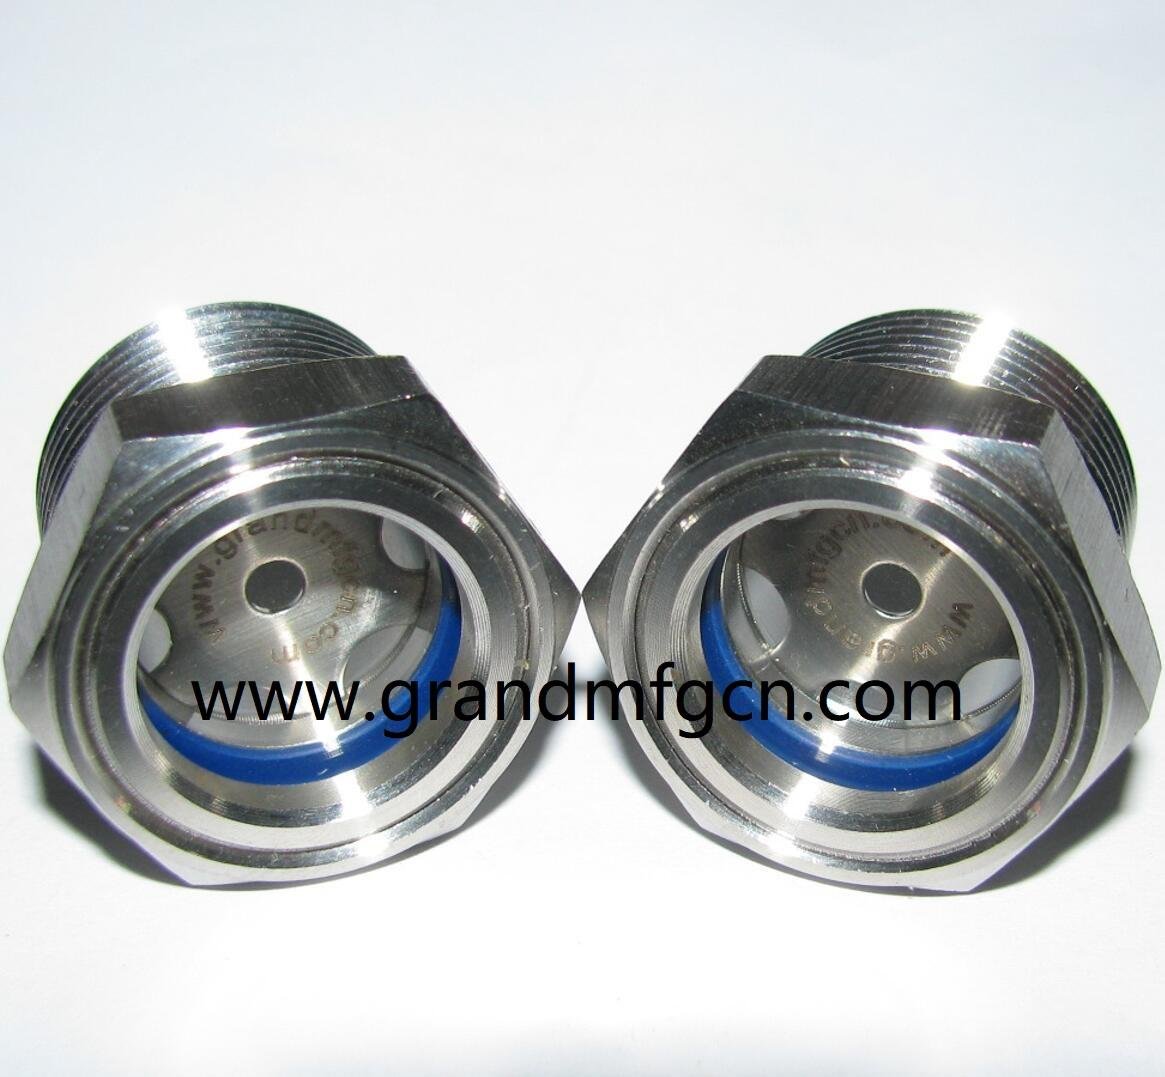 STAINLESS STEEL SS304 BSP OIL SIGHT GLASS